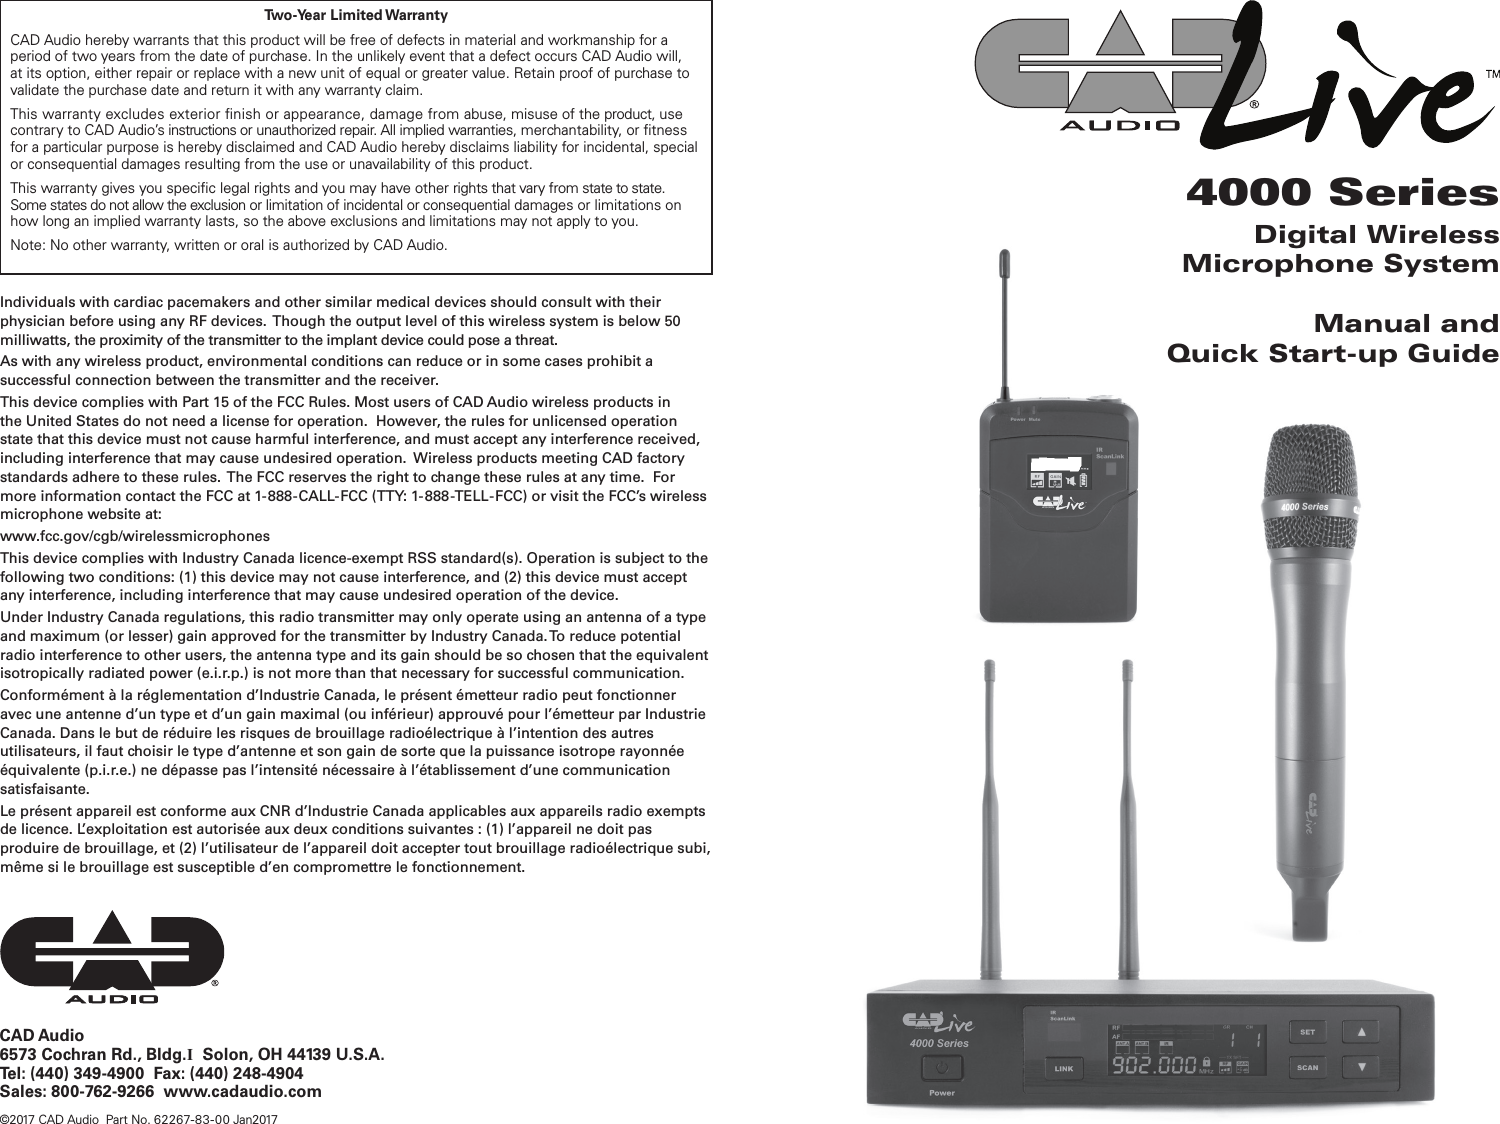 CAD Audio6573 Cochran Rd., Bldg.I  Solon, OH 44139 U.S.A.Tel: (440) 349-4900  Fax: (440) 248-4904Sales: 800-762-9266  www.cadaudio.com©2017 CAD Audio  Part No. 62267-83- 00 Jan20174000 SeriesDigital Wireless Microphone SystemManual andQuick Start-up GuideTwo-Year  Limited WarrantyCAD Audio hereby warrants that this product will be free of defects in material and workmanship for a period of two years from the date of purchase. In the unlikely event that a defect occurs CAD Audio will, at its option, either repair or replace with a new unit of equal or greater value. Retain proof of purchase to validate the purchase date and return it with any warranty claim.This warranty excludes exterior nish or appearance, damage from abuse, misuse of the product, use contrary to CAD Audio’s instructions or unauthorized repair. All implied warranties, merchantability, or tness for a particular purpose is hereby disclaimed and CAD Audio hereby disclaims liability for incidental, special or consequential damages resulting from the use or unavailability of this product.This warranty gives you specic legal rights and you may have other rights that vary from state to state. Some states do not allow the exclusion or limitation of incidental or consequential damages or limitations on how long an implied warranty lasts, so the above exclusions and limitations may not apply to you.Note: No other warranty, written or oral is authorized by CAD Audio.Individuals with cardiac pacemakers and other similar medical devices should consult with their physician before using any RF devices.  Though the output level of this wireless system is below 50 milliwatts, the proximity of the transmitter to the implant device could pose a threat.As with any wireless product, environmental conditions can reduce or in some cases prohibit a successful connection between the transmitter and the receiver.  This device complies with Part 15 of the FCC Rules. Most users of CAD Audio wireless products in the United States do not need a license for operation.  However, the rules for unlicensed operation state that this device must not cause harmful interference, and must accept any interference received, including interference that may cause undesired operation.  Wireless products meeting CAD factory standards adhere to these rules.  The FCC reserves the right to change these rules at any time.  For more information contact the FCC at 1-888-CALL-FCC (TTY: 1-888-TELL-FCC) or visit the FCC’s wireless microphone website at:www.fcc.gov/cgb/wirelessmicrophones This device complies with Industry Canada licence-exempt RSS standard(s). Operation is subject to the following two conditions: (1) this device may not cause interference, and (2) this device must accept any interference, including interference that may cause undesired operation of the device.Under Industry Canada regulations, this radio transmitter may only operate using an antenna of a type and maximum (or lesser) gain approved for the transmitter by Industry Canada. To reduce potential radio interference to other users, the antenna type and its gain should be so chosen that the equivalent isotropically radiated power (e.i.r.p.) is not more than that necessary for successful communication.Conformément à la réglementation d’Industrie Canada, le présent émetteur radio peut fonctionner avec une antenne d’un type et d’un gain maximal (ou inférieur) approuvé pour l’émetteur par Industrie Canada. Dans le but de réduire les risques de brouillage radioélectrique à l’intention des autres utilisateurs, il faut choisir le type d’antenne et son gain de sorte que la puissance isotrope rayonnée équivalente (p.i.r.e.) ne dépasse pas l’intensité nécessaire à l’établissement d’une communication satisfaisante.Le présent appareil est conforme aux CNR d’Industrie Canada applicables aux appareils radio exempts de licence. L’exploitation est autorisée aux deux conditions suivantes : (1) l’appareil ne doit pas produire de brouillage, et (2) l’utilisateur de l’appareil doit accepter tout brouillage radioélectrique subi, même si le brouillage est susceptible d’en compromettre le fonctionnement.